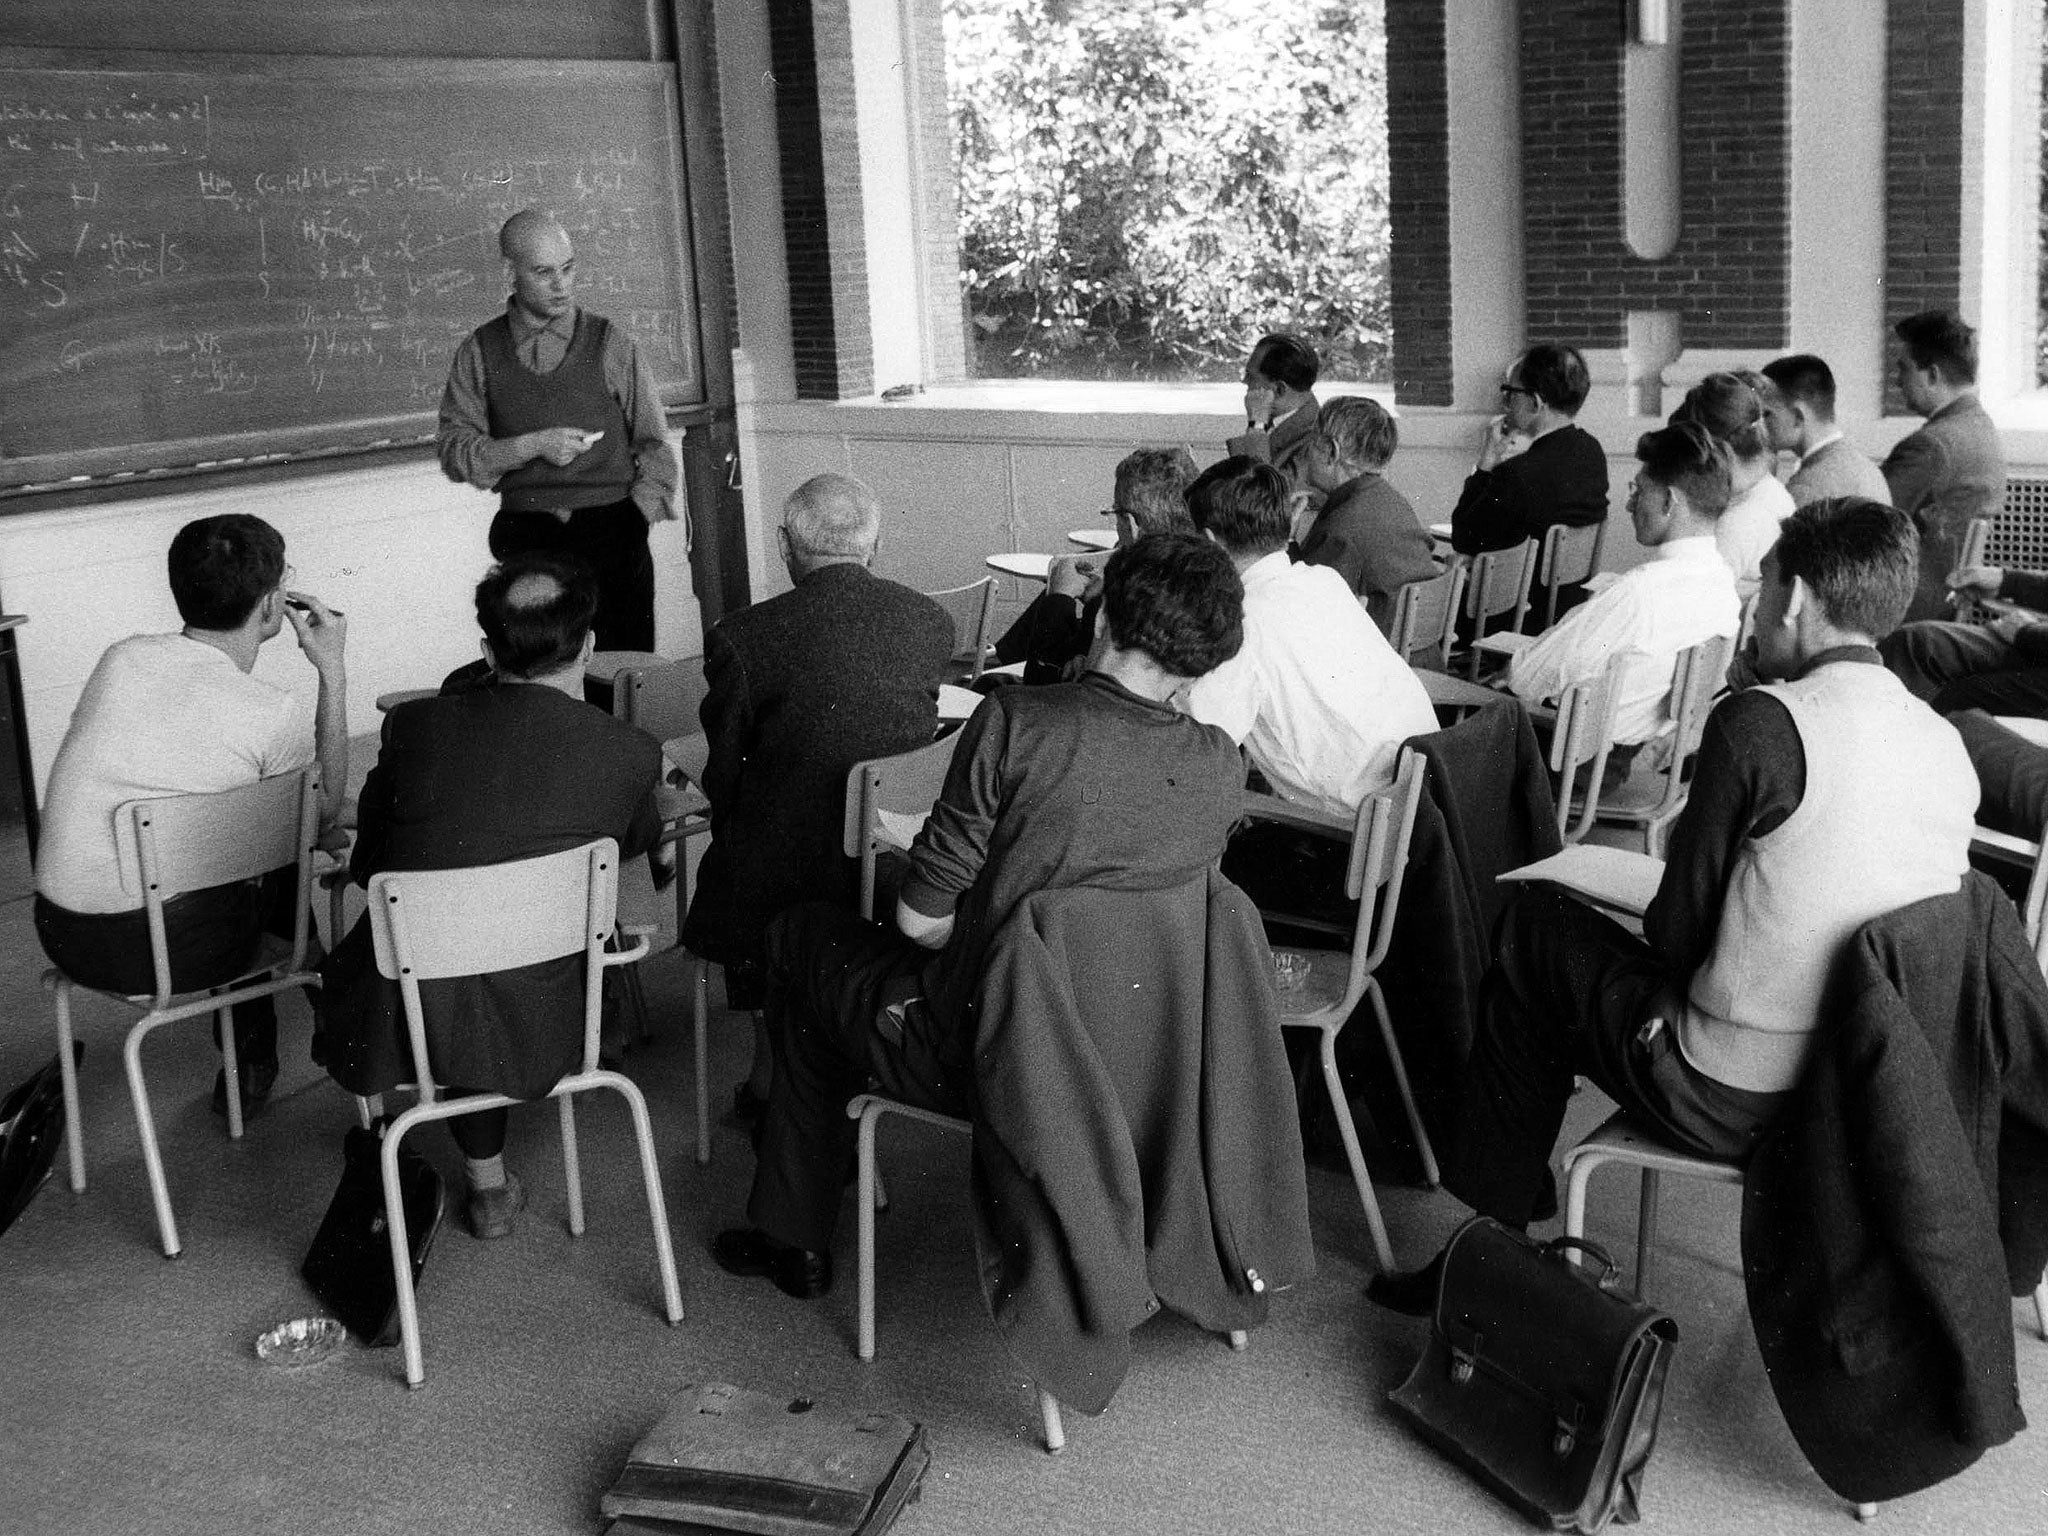 Grothendieck teaching at the IHES in the 1960s; he left when he learned that the Institute was receiving funding from the French defence ministry